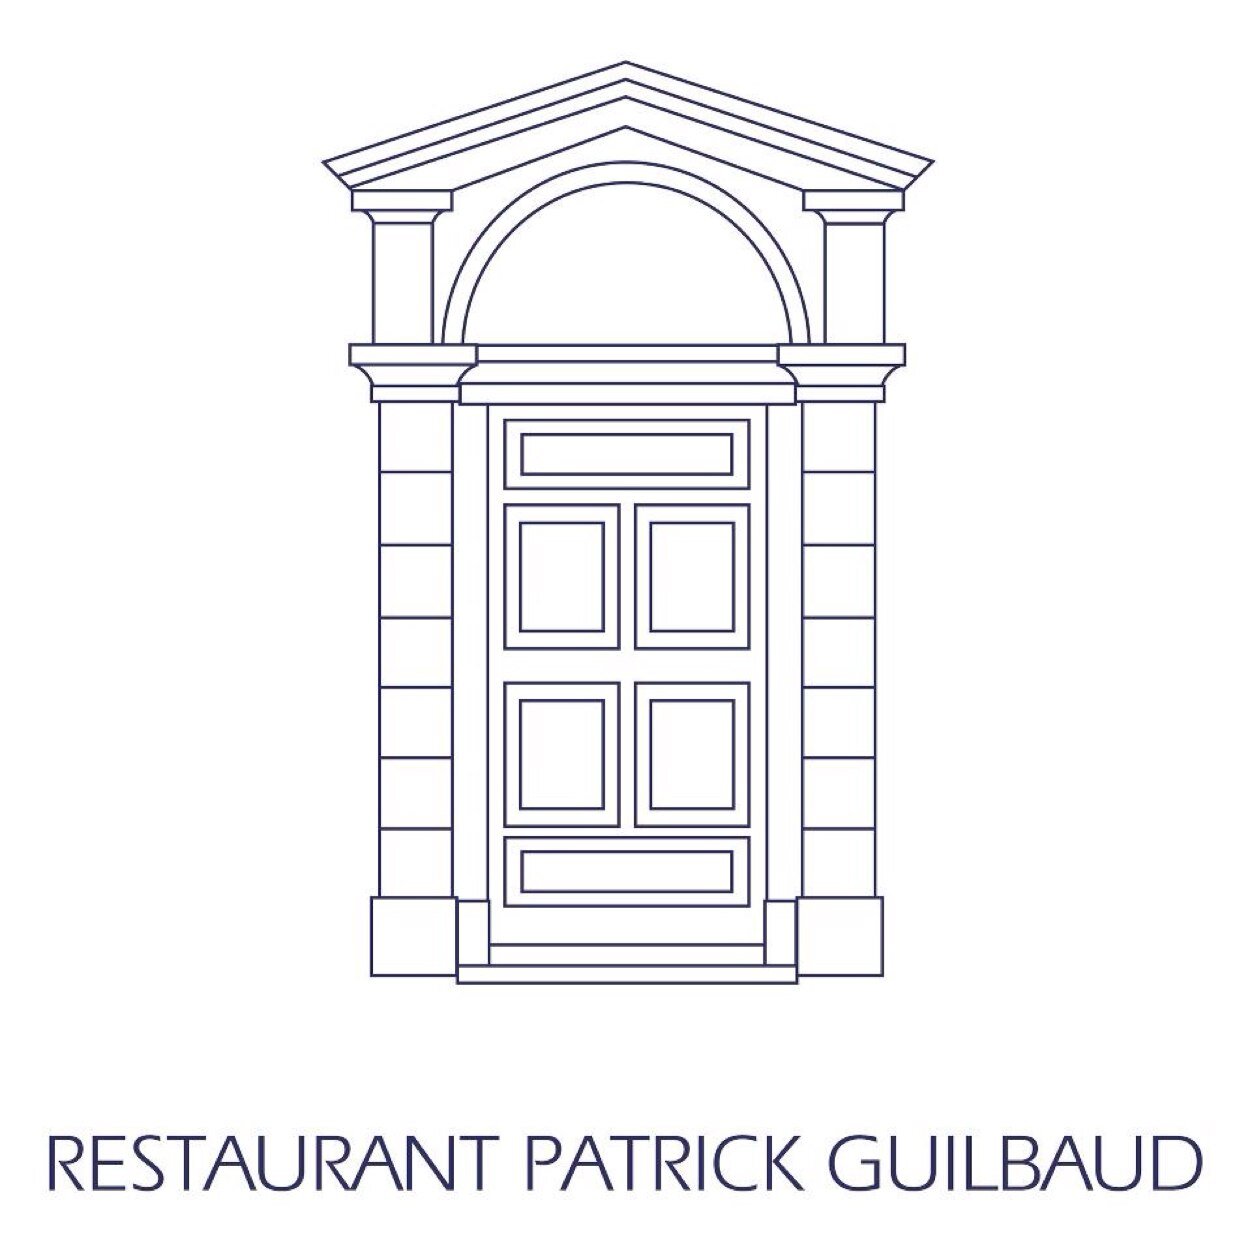 Two Michelin Starred Restaurant located in Dublin. Wonderful food in luxurious surroundings.